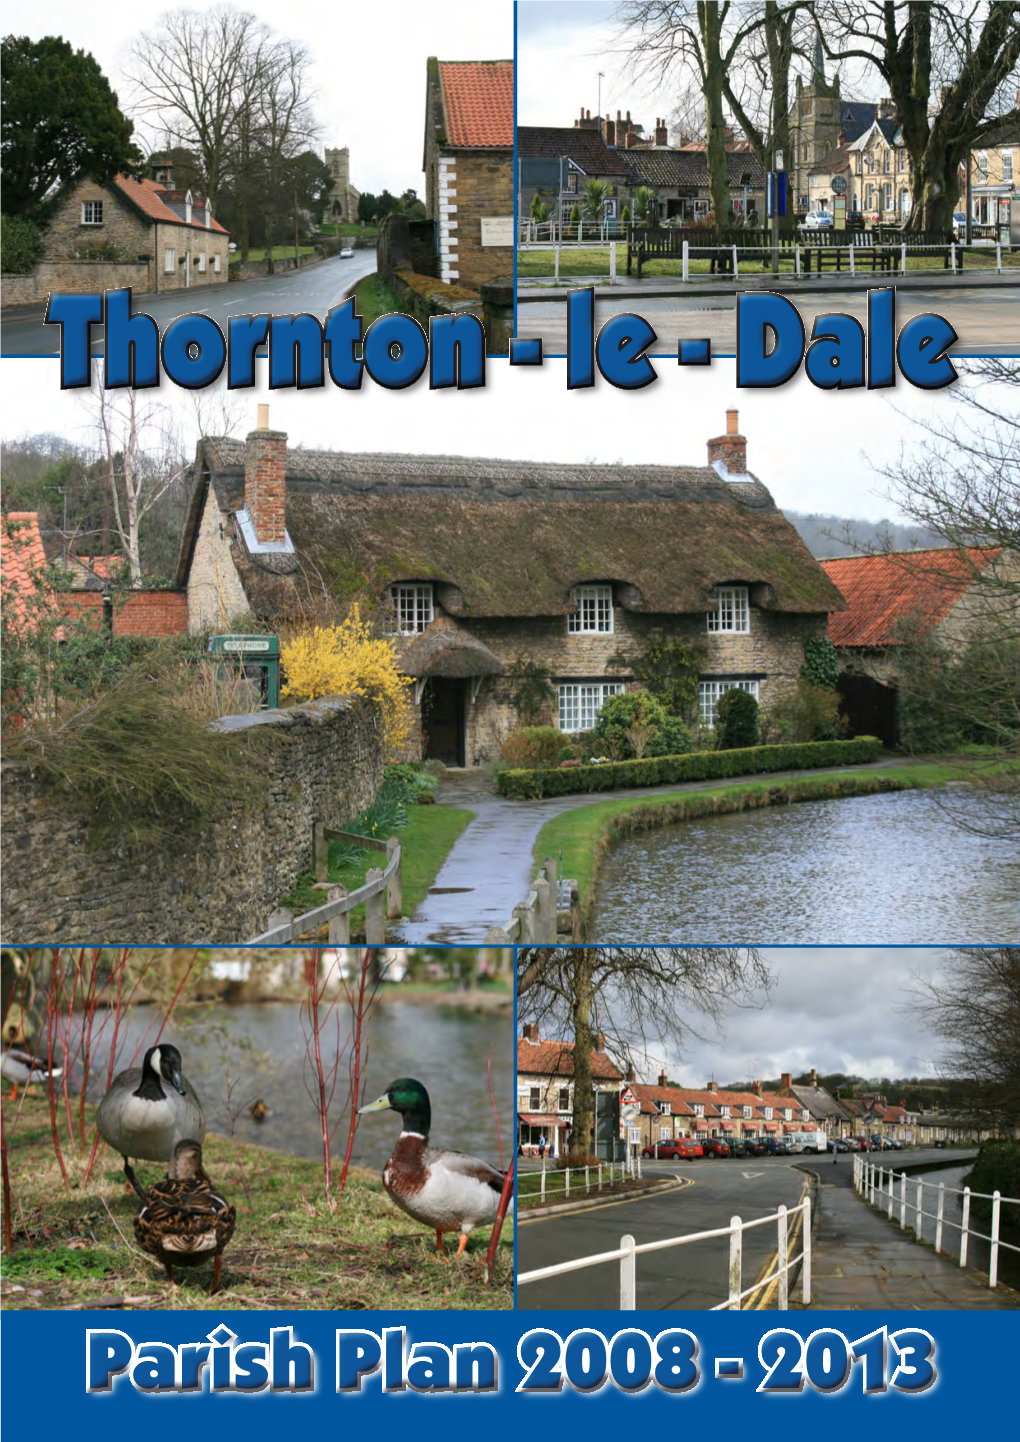 History of Thornton Le Dale